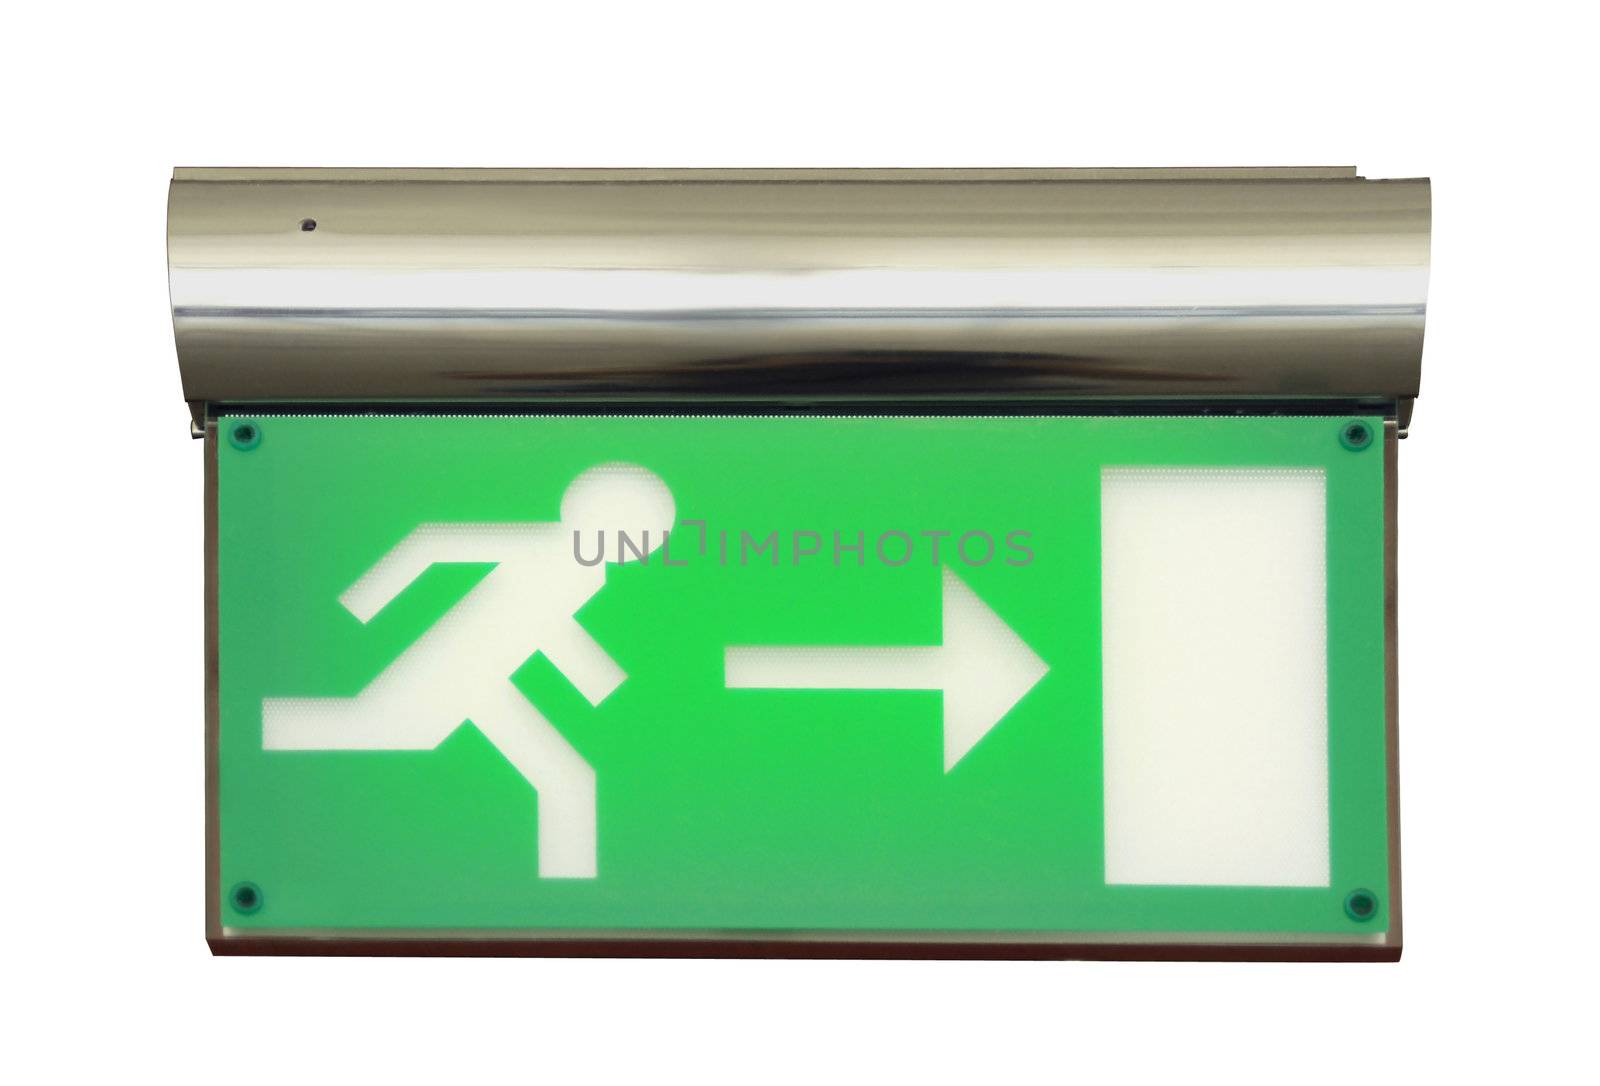 Emergency exit sign with clipping path by cienpies